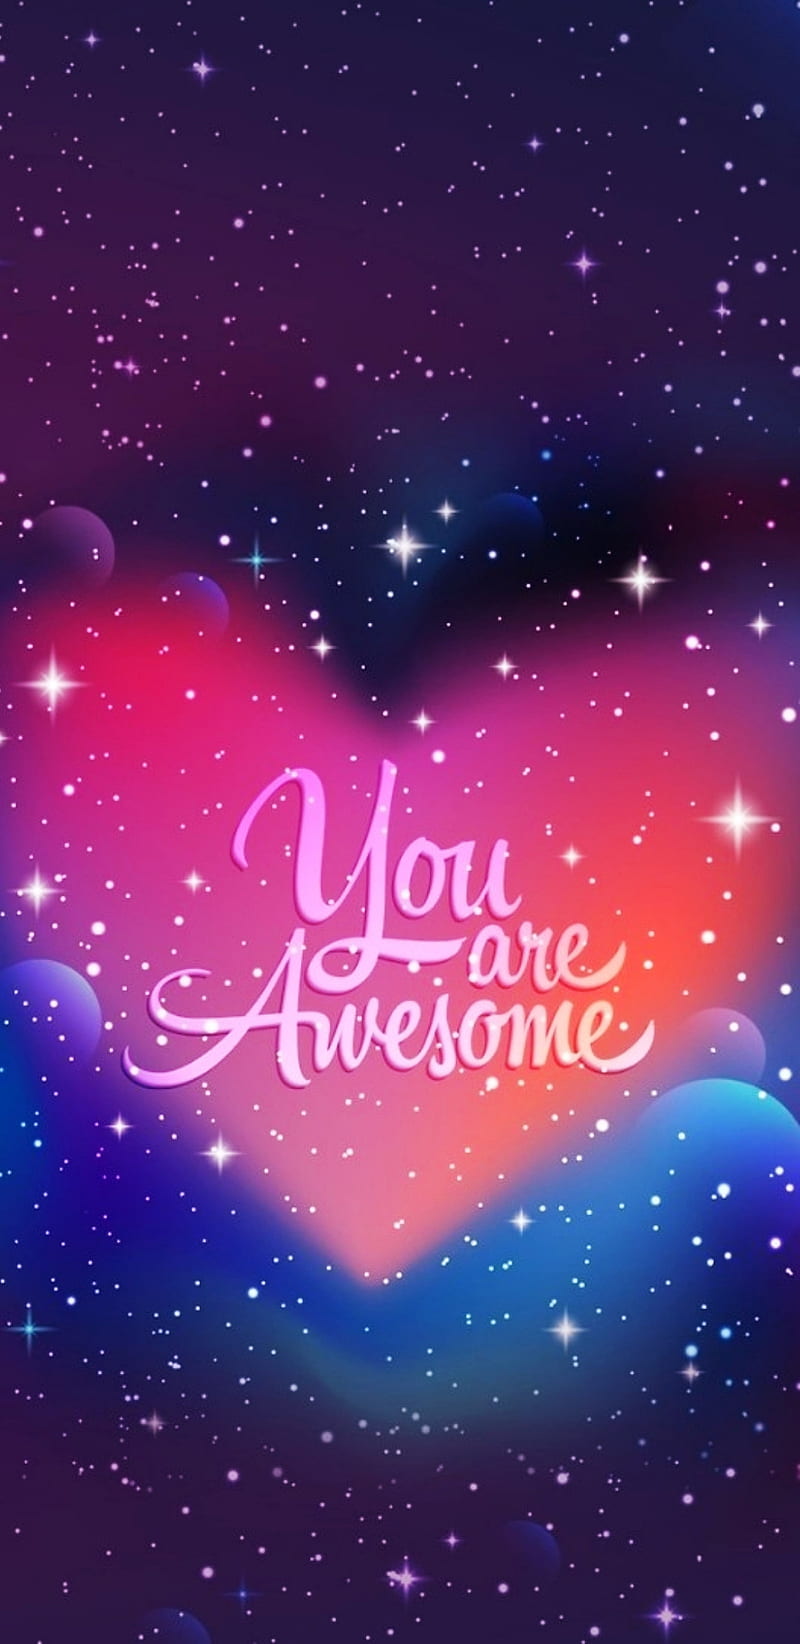 You Are Awesome, galaxy, heart, pink, quote, sayings, HD phone wallpaper